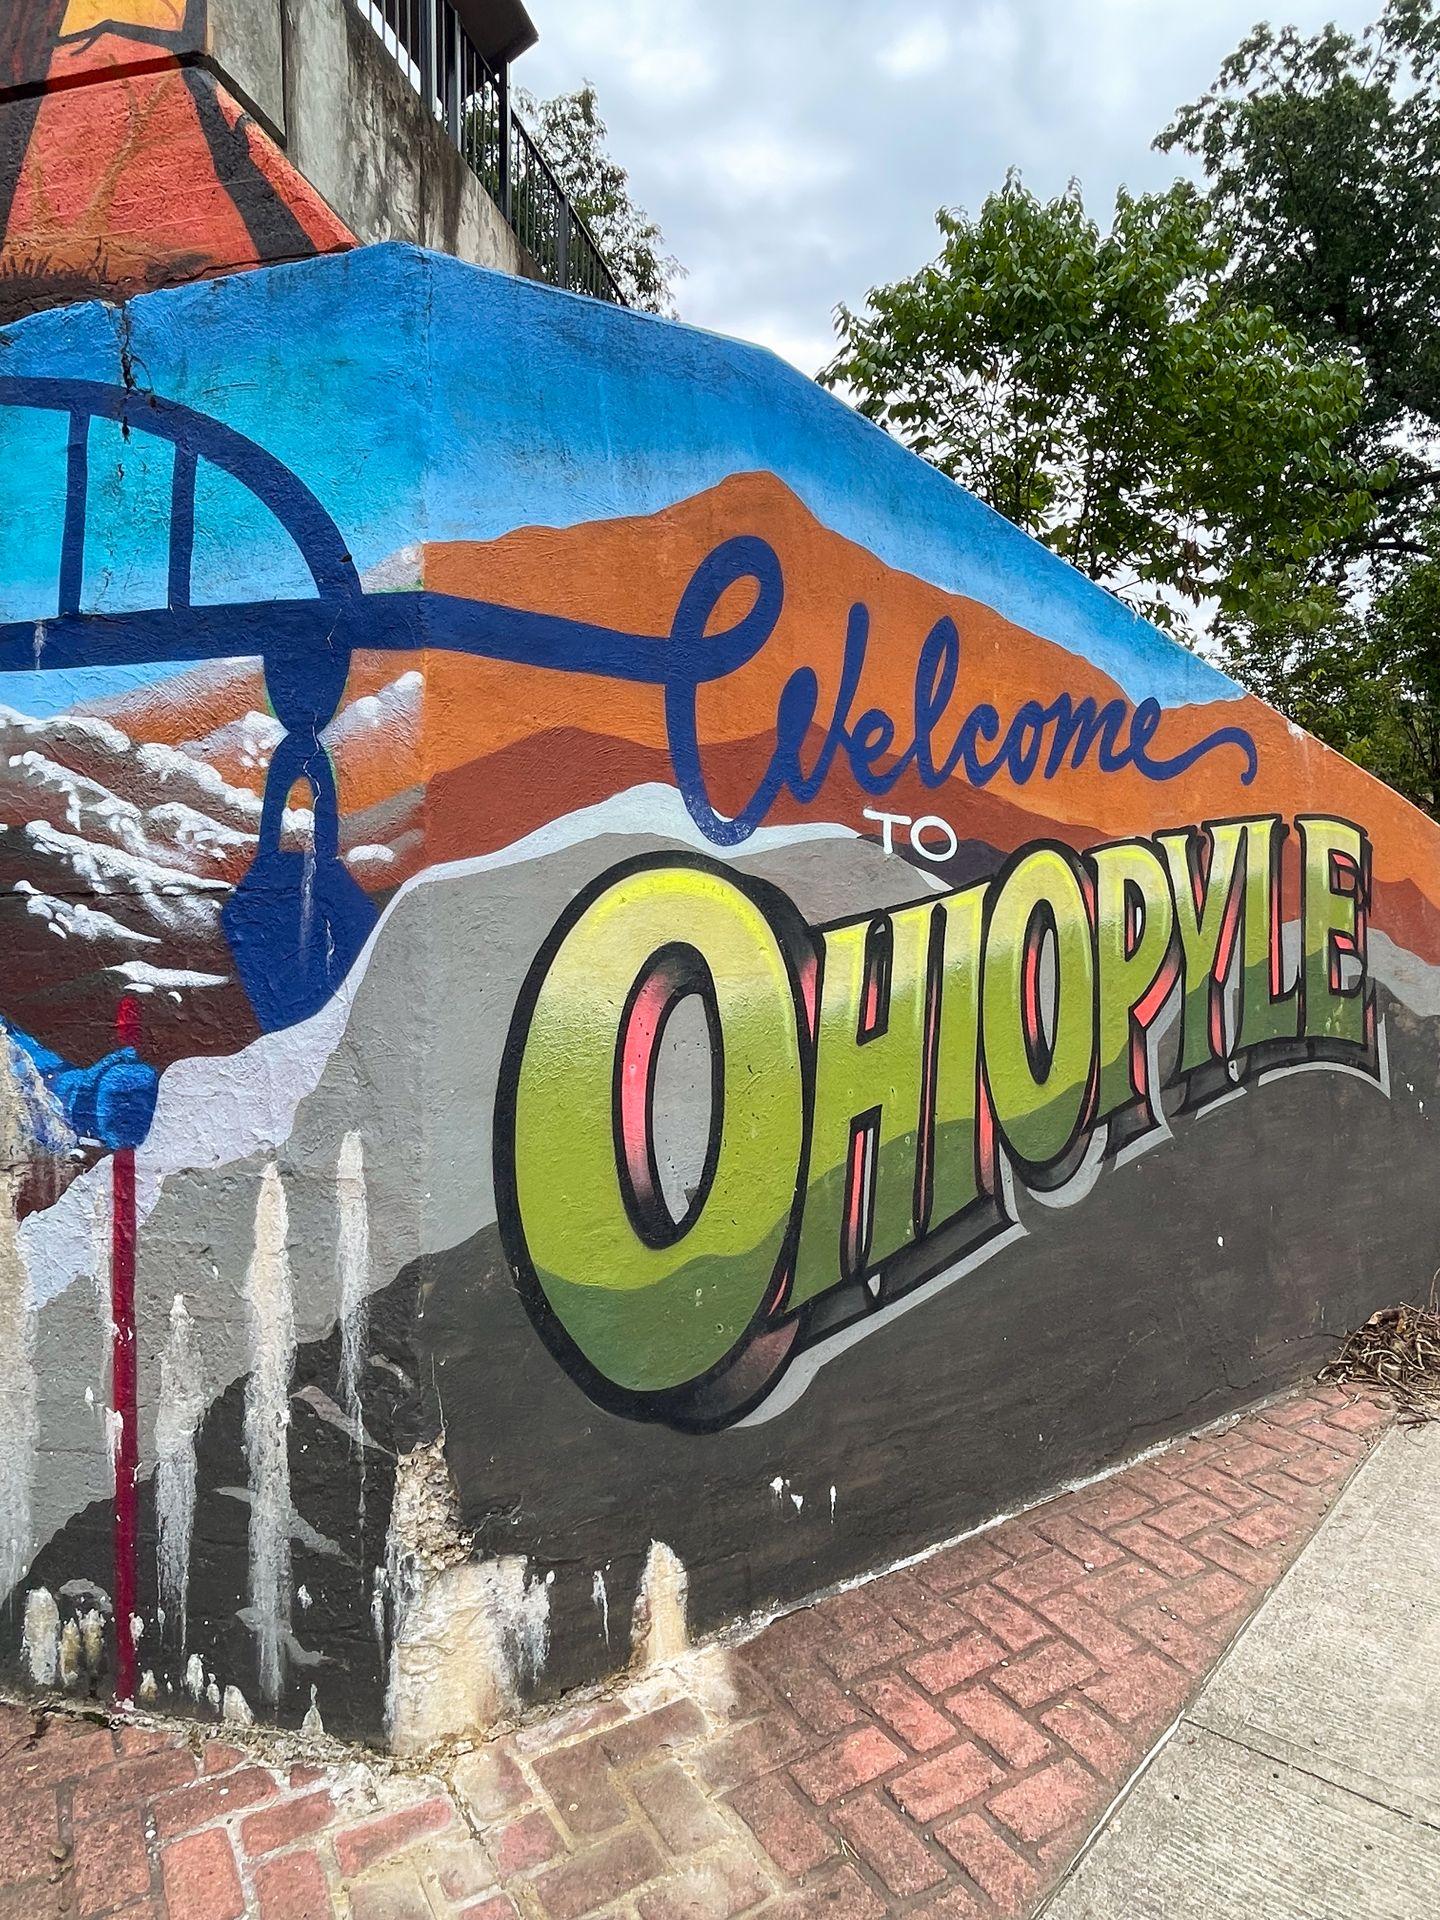 A mural over a corner that reads "Welcome to Ohiopyle" written in blue and green letters.